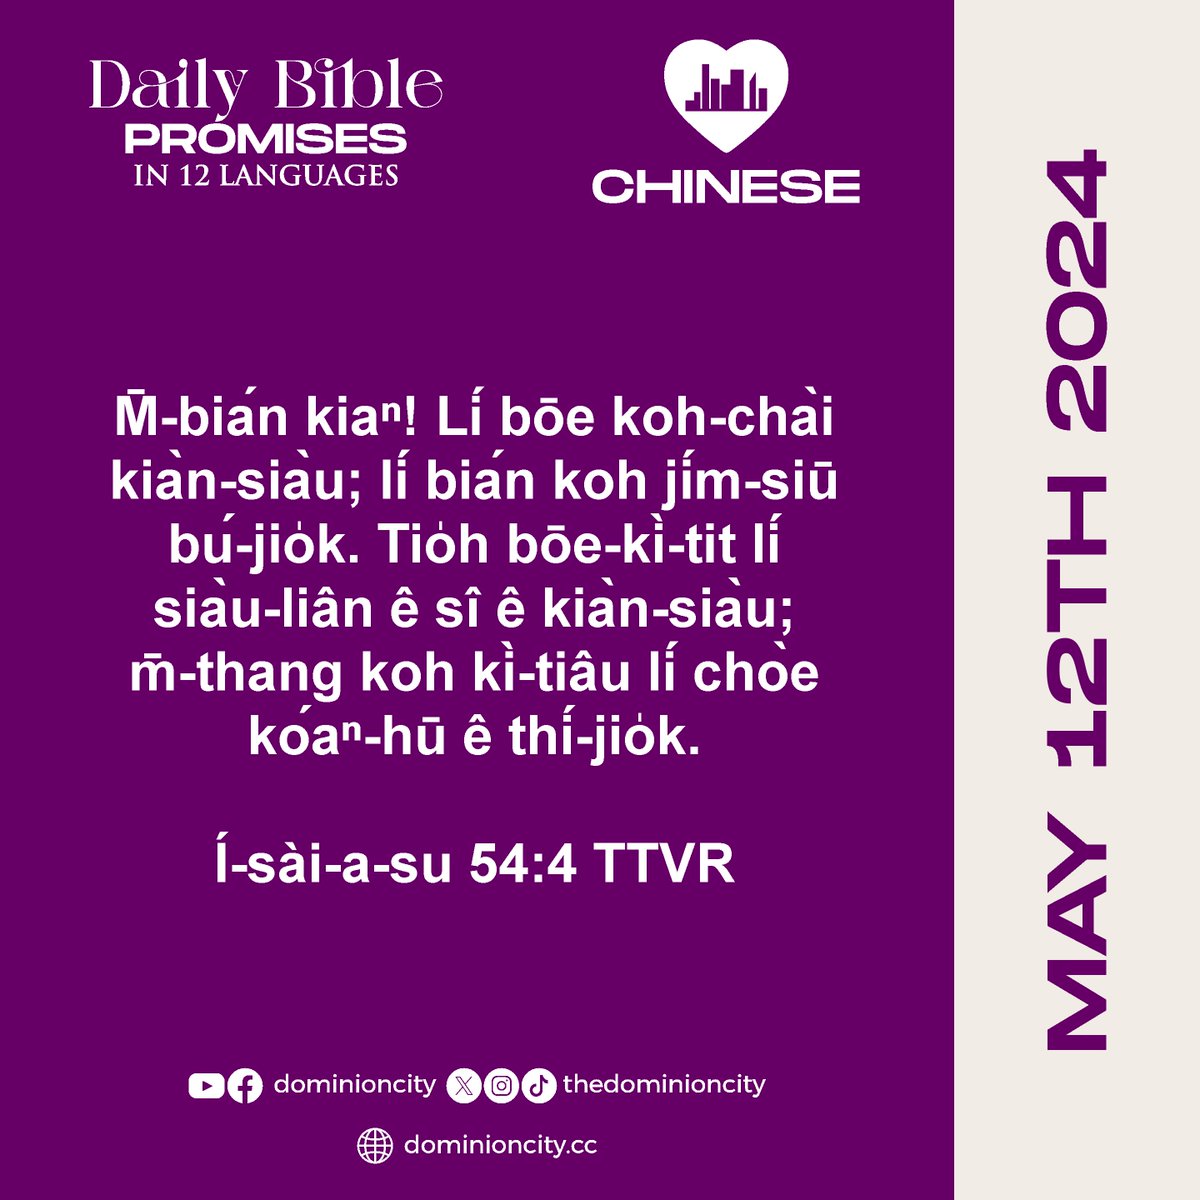 If you believe, type “AMEN”!

SET 1 of 3 | DAILY BIBLE PROMISES IN 12 LANGUAGES | MAY 12TH 2024 | LIKE, FOLLOW & SHARE

#Bible #GodsWord #trendingnow #Biblepromises #trendingreels #hope #love #faith #GoodNews #NewsUpdate